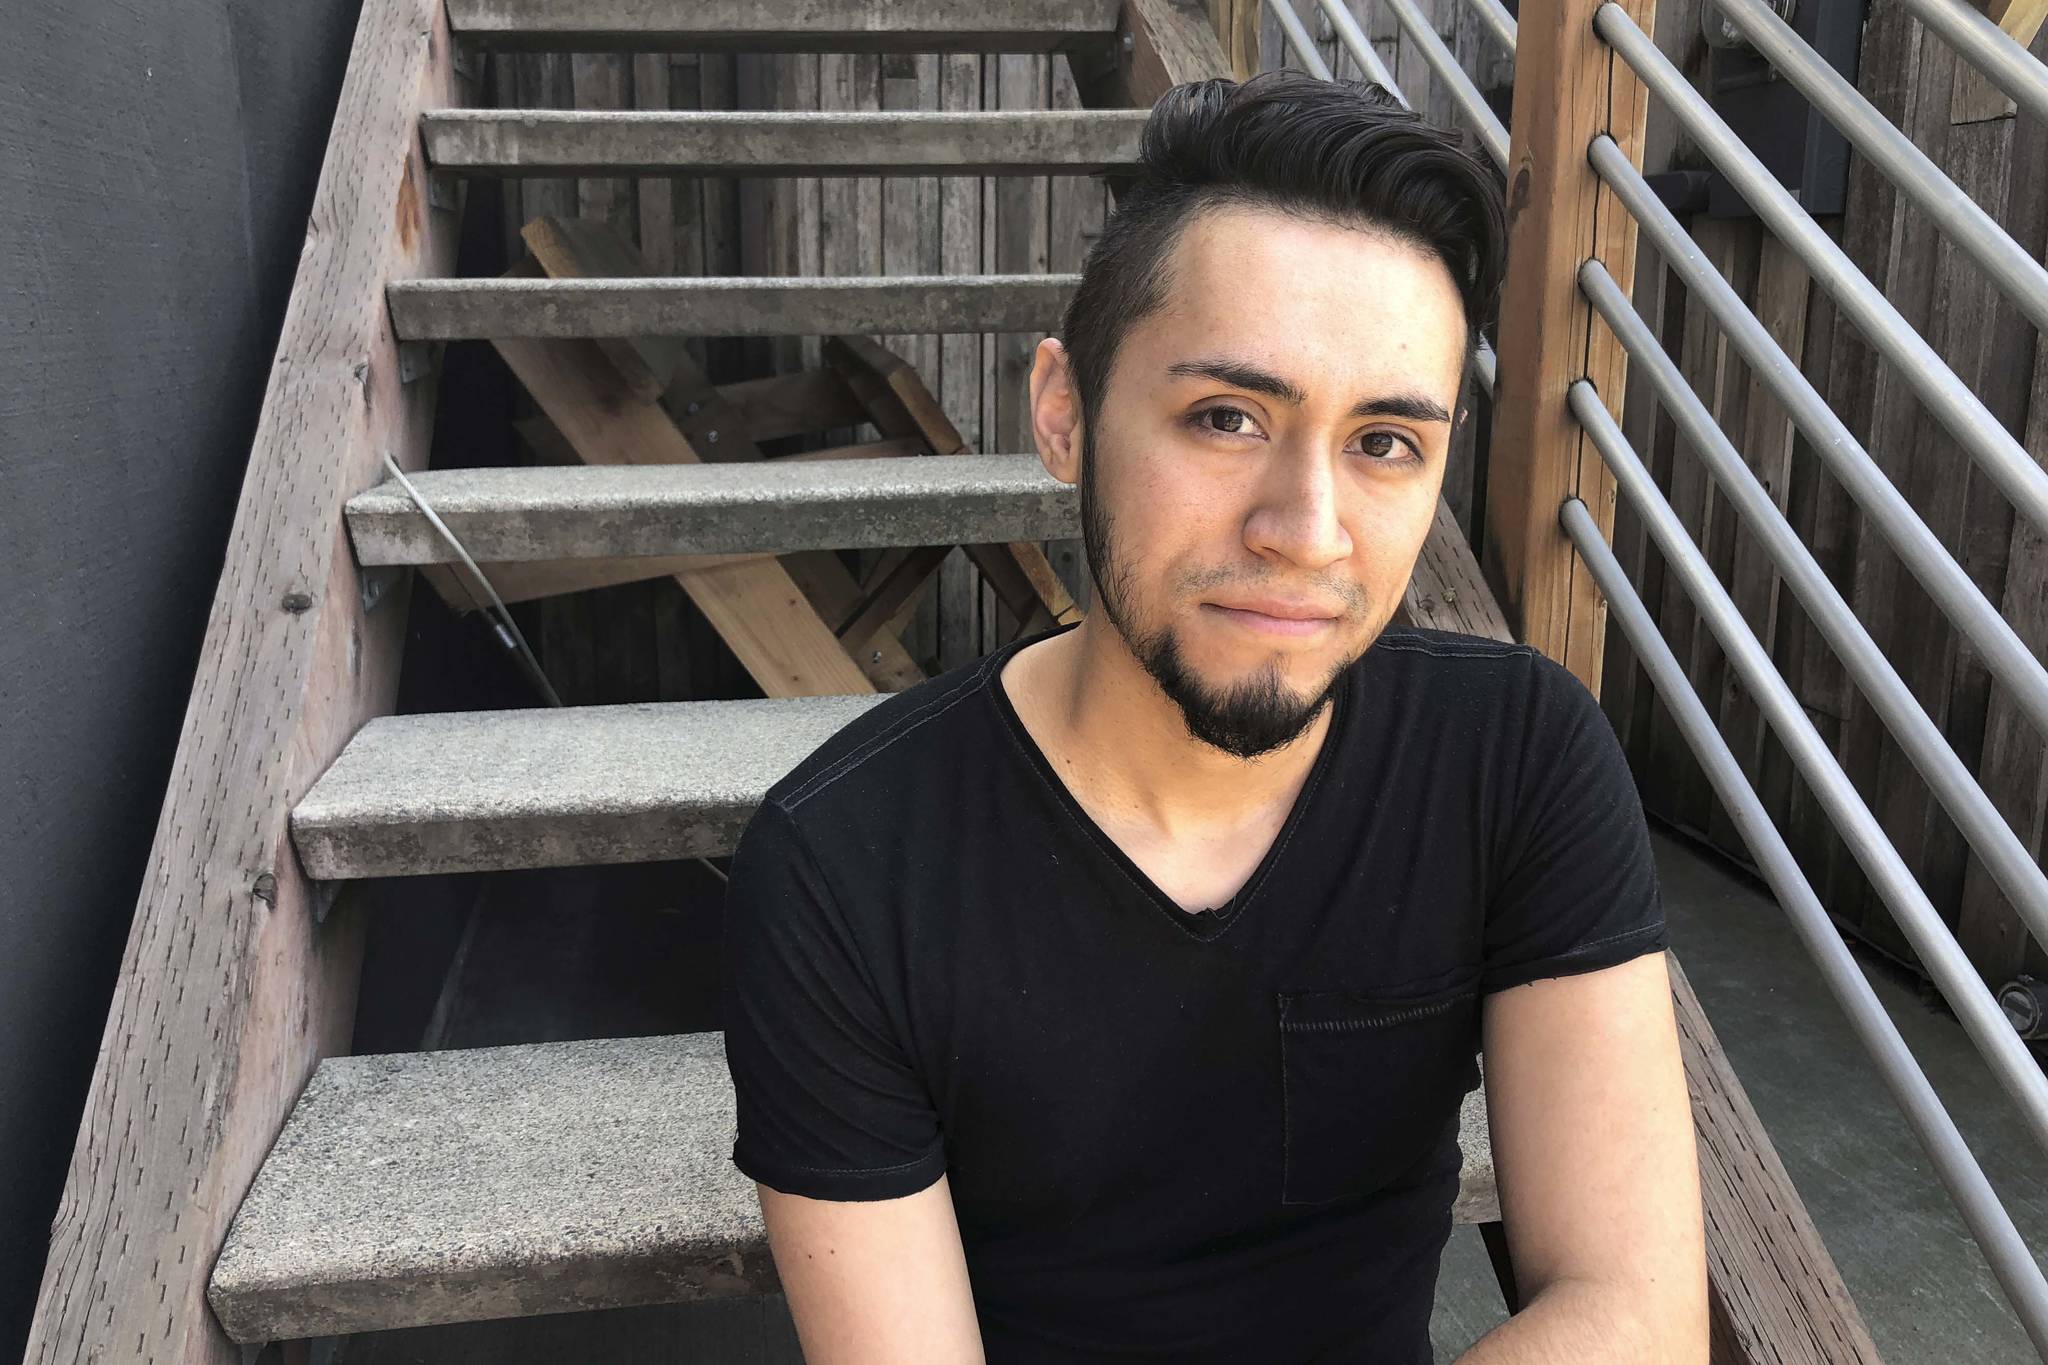 Former New Seasons Market employee Adrian Mendoza believes their firing was an act of retaliation for attempting to organize coworkers.